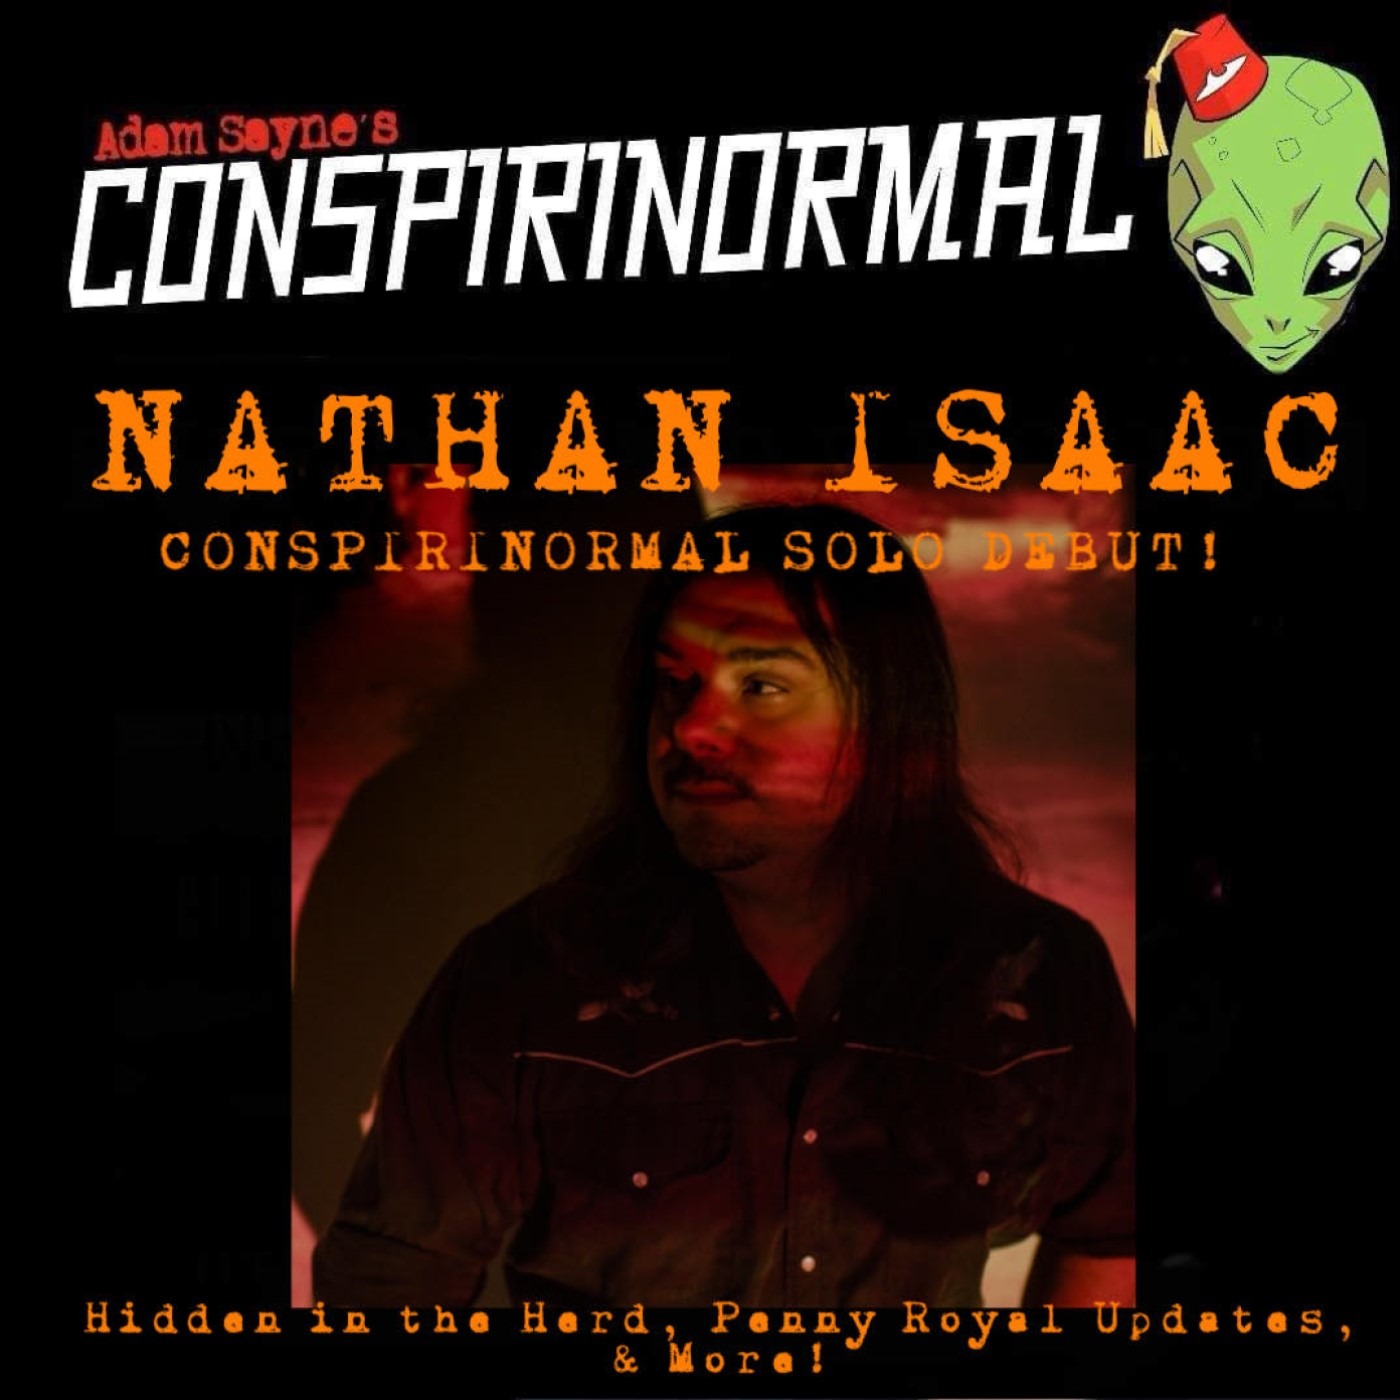 Conspirinormal 472- Nathan Isaac (Cattle Mutilations, Holy Grail, and Somerset Coincidences.)